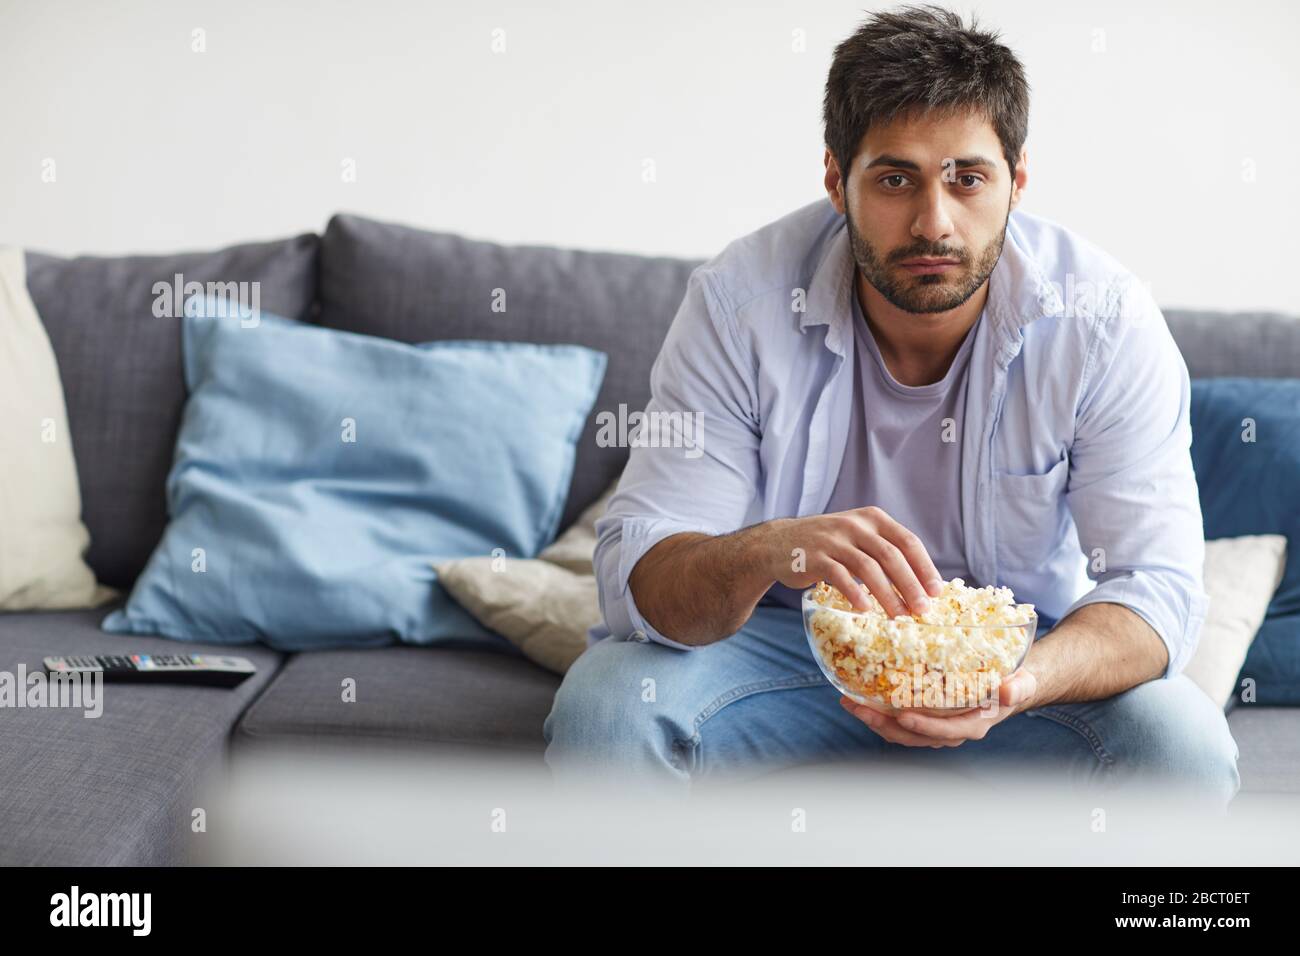 Portrait of sad bearded man watching TV and holding bowl of popcorn while sitting on sofa at home, copy space Stock Photo